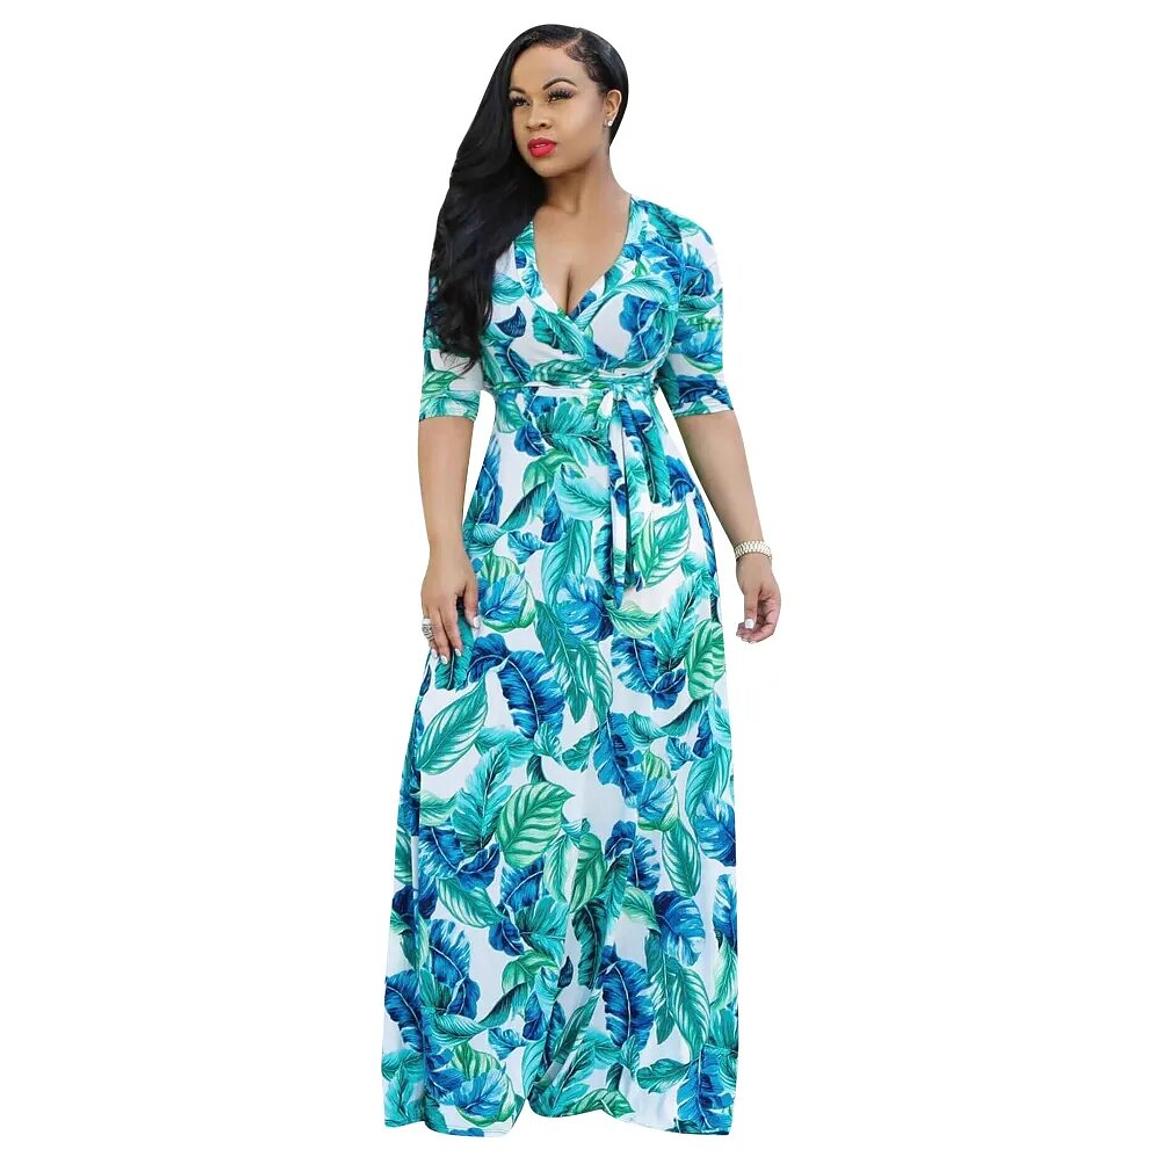 Blue and Teal V-neck Full Length Maxi Dress with Belt - Available in Sizes S -3XL